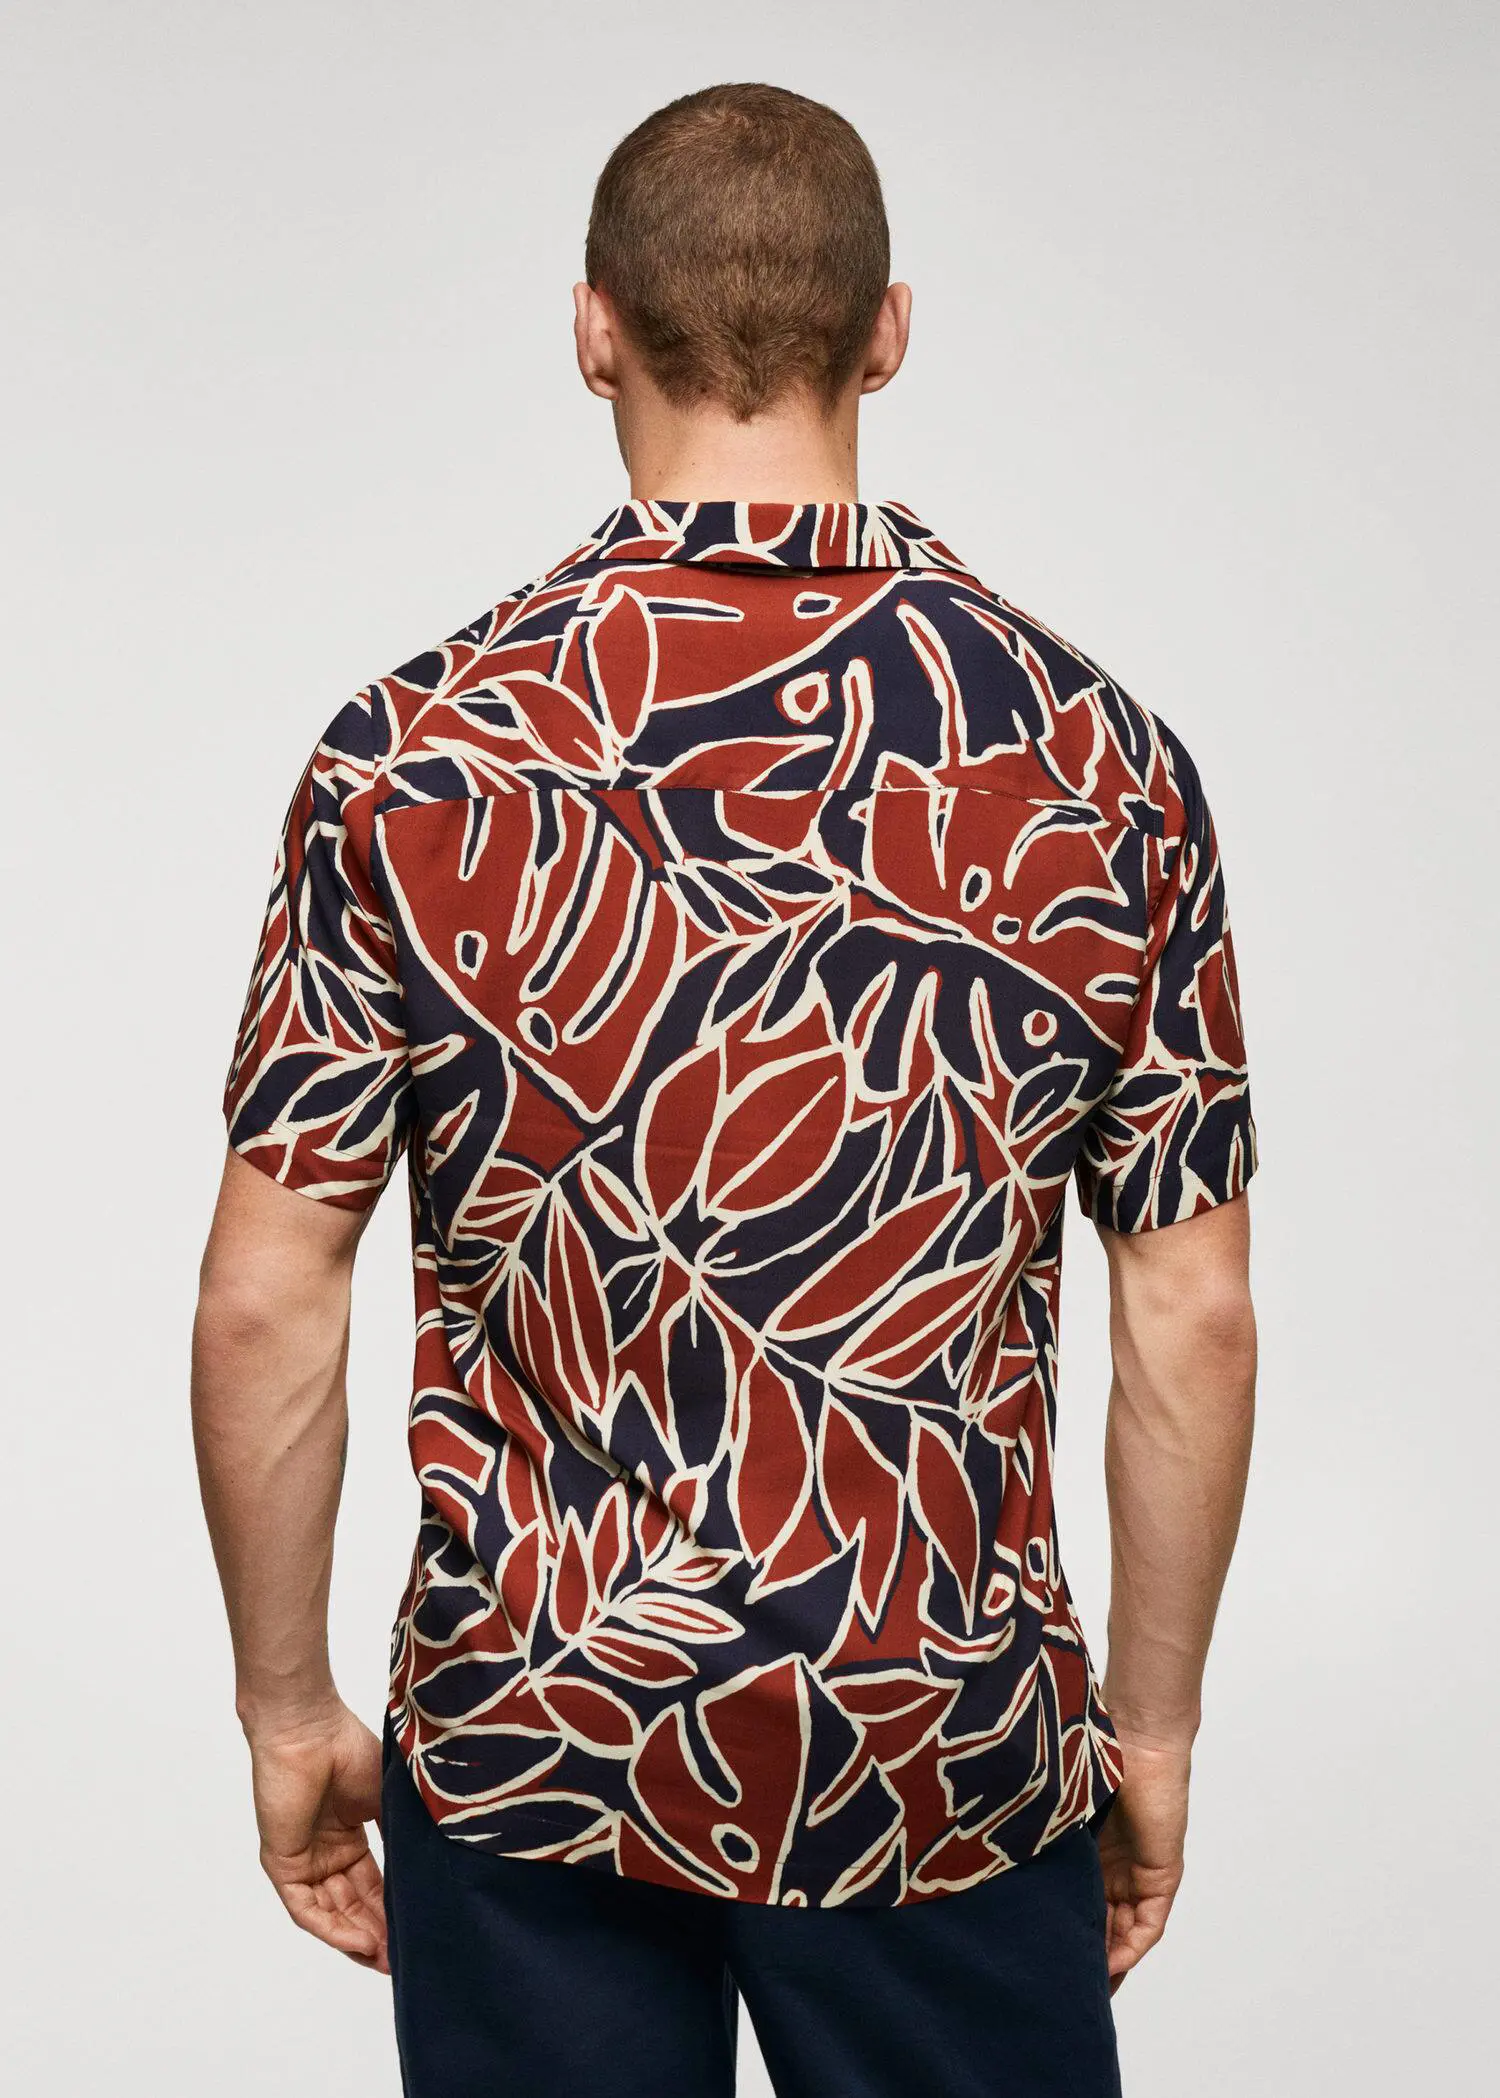 Mango Bowling shirt with leaf print. a man wearing a red and black shirt. 